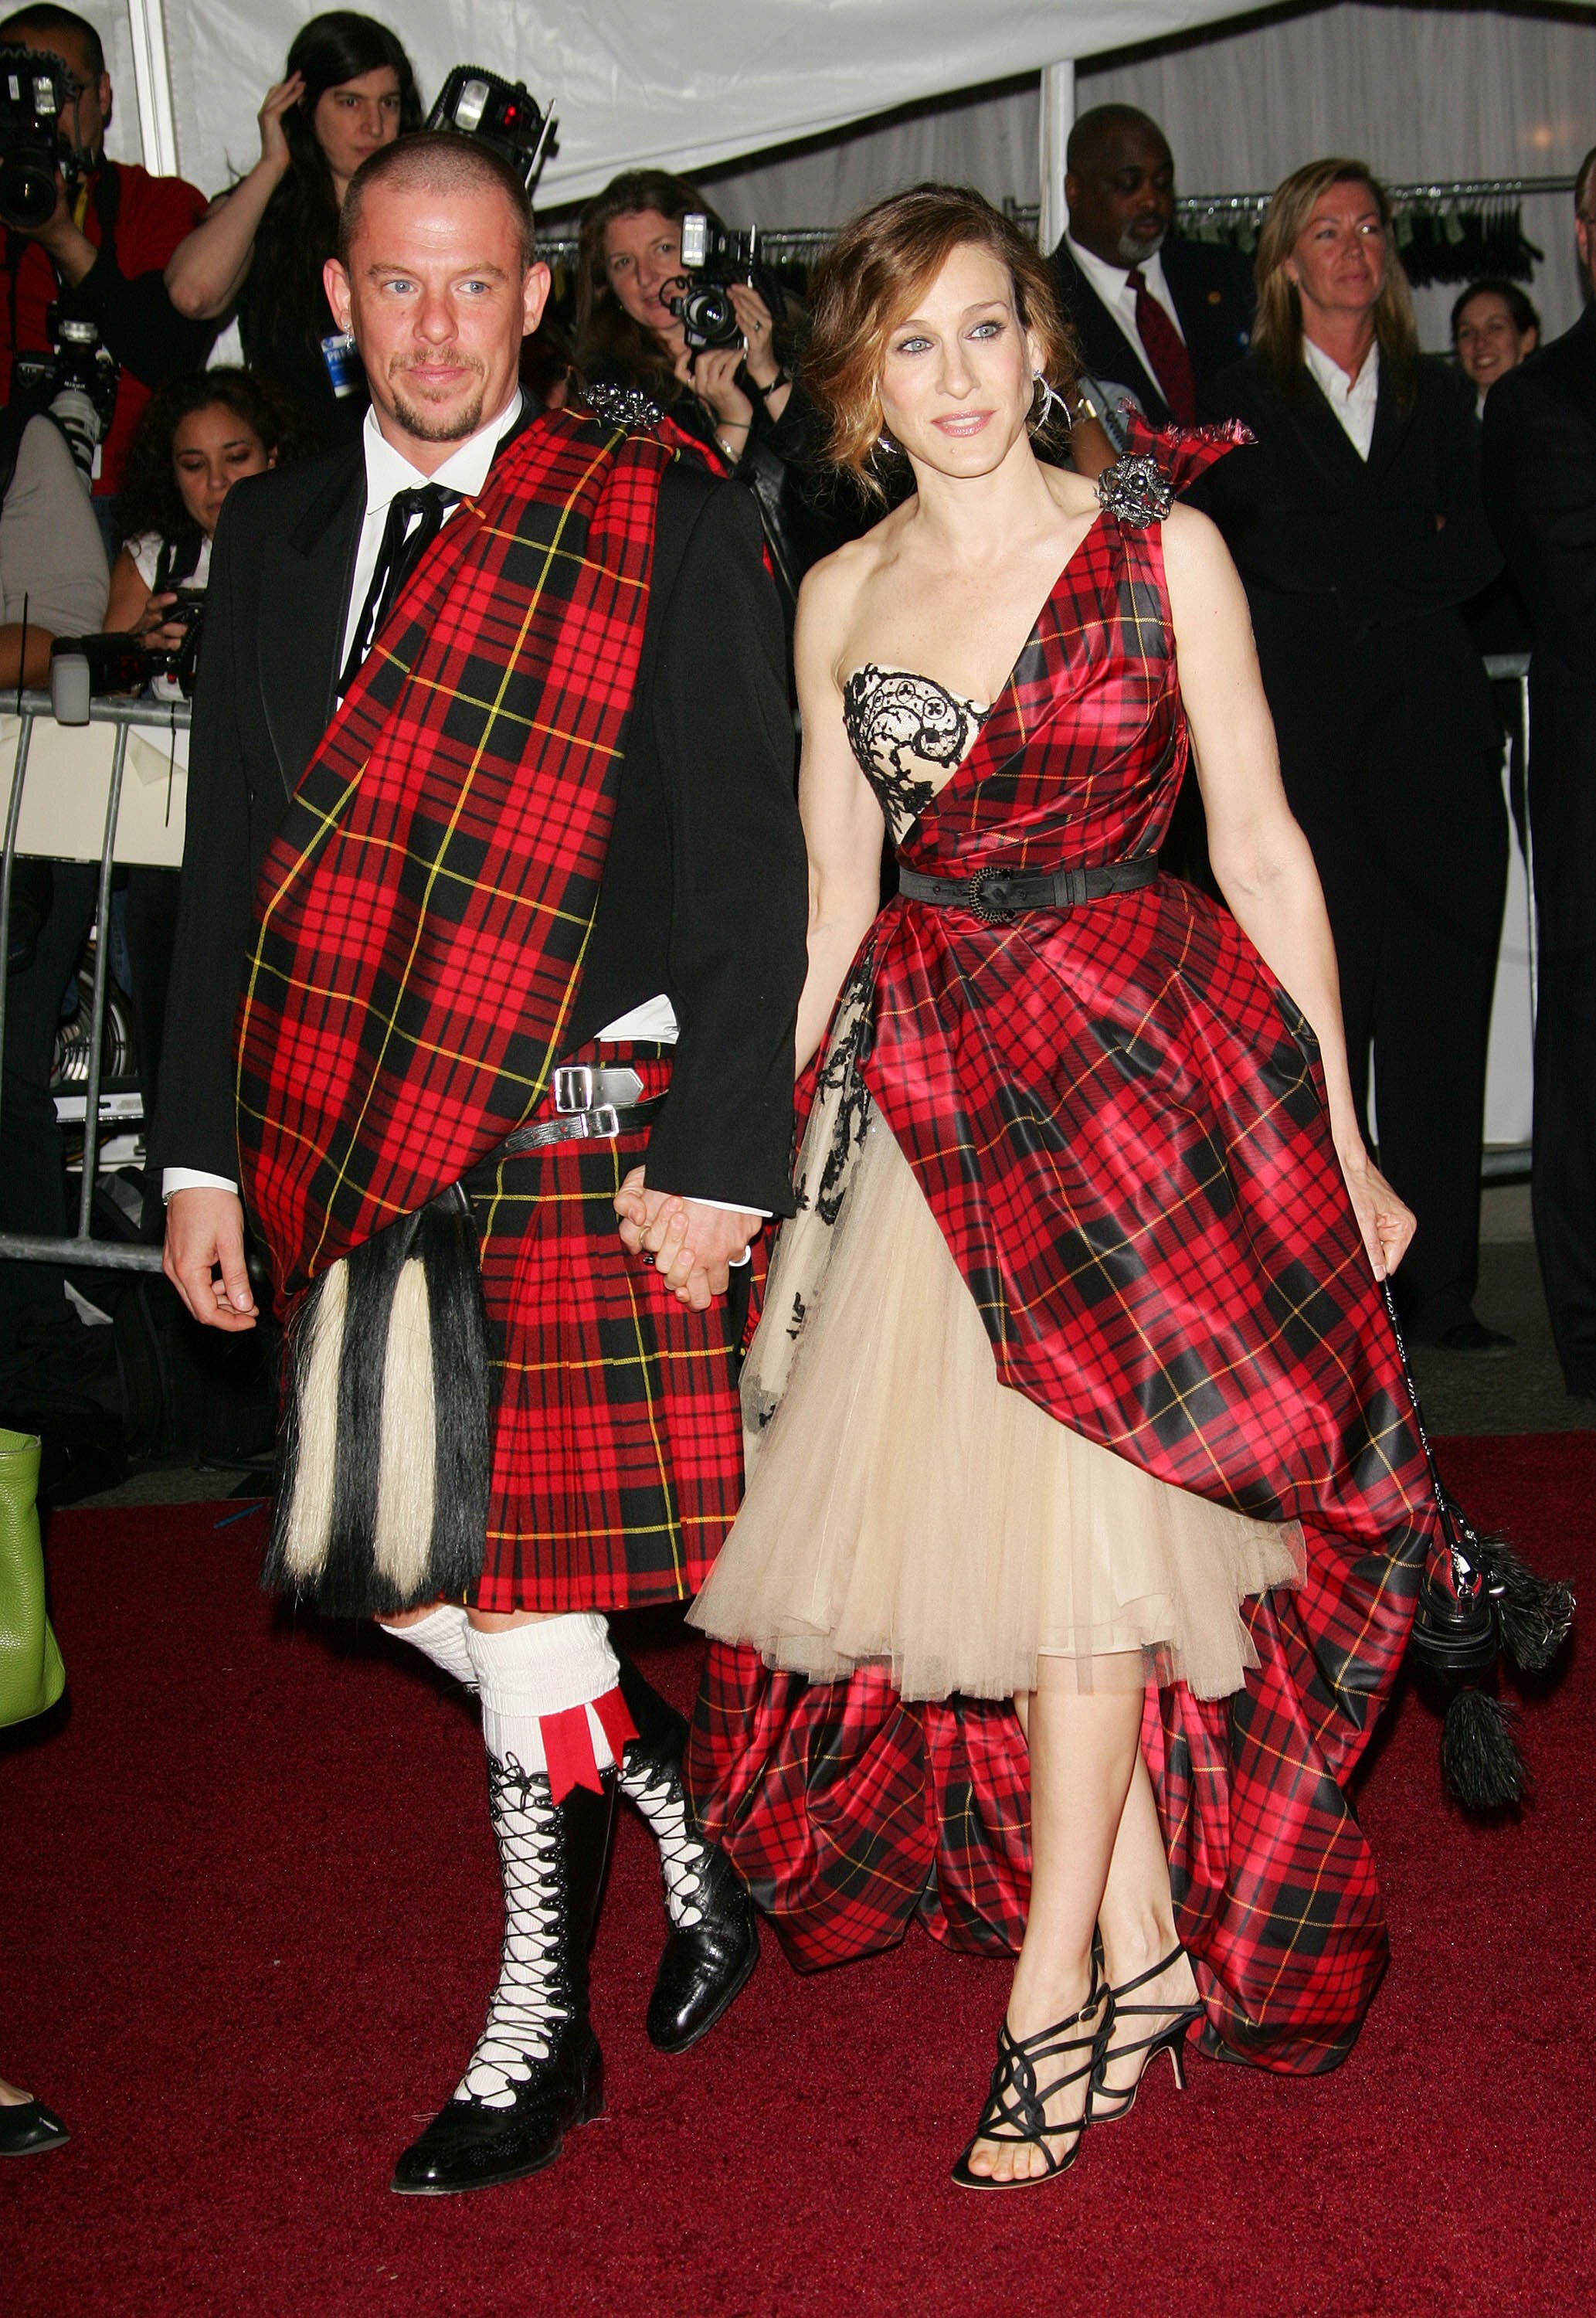 30-something white man with close-shaved head wearing suit and tartan sash with 30-something white woman in tartan dress.